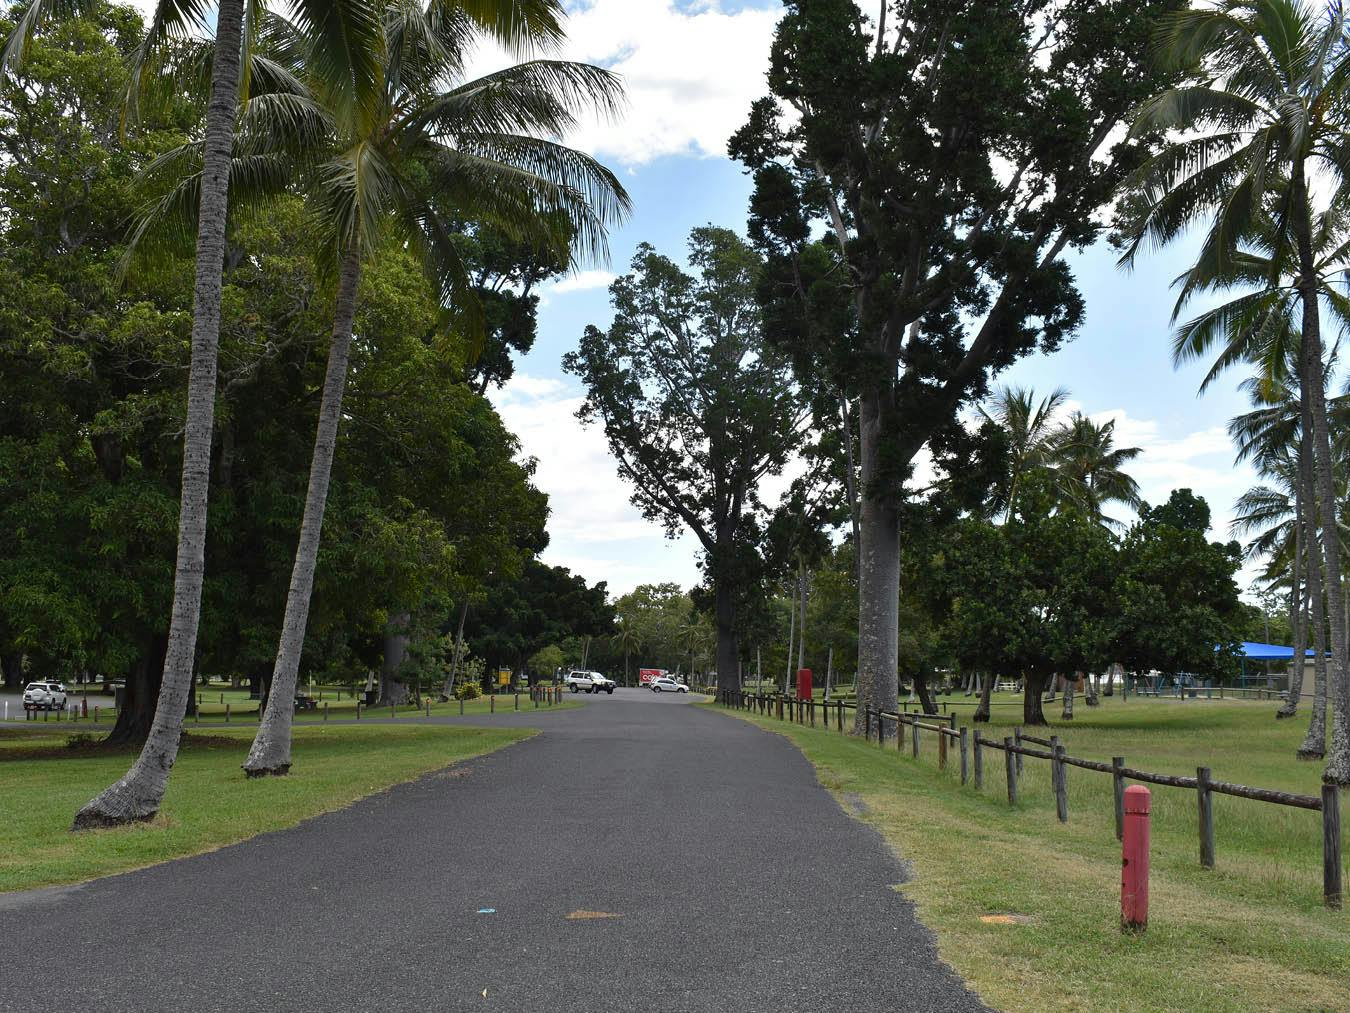 Intersection 1 - Looking west along the centre of Seaforth Esplanade Road towards the existing car park which services swimming enclosure and associated picnic area. 